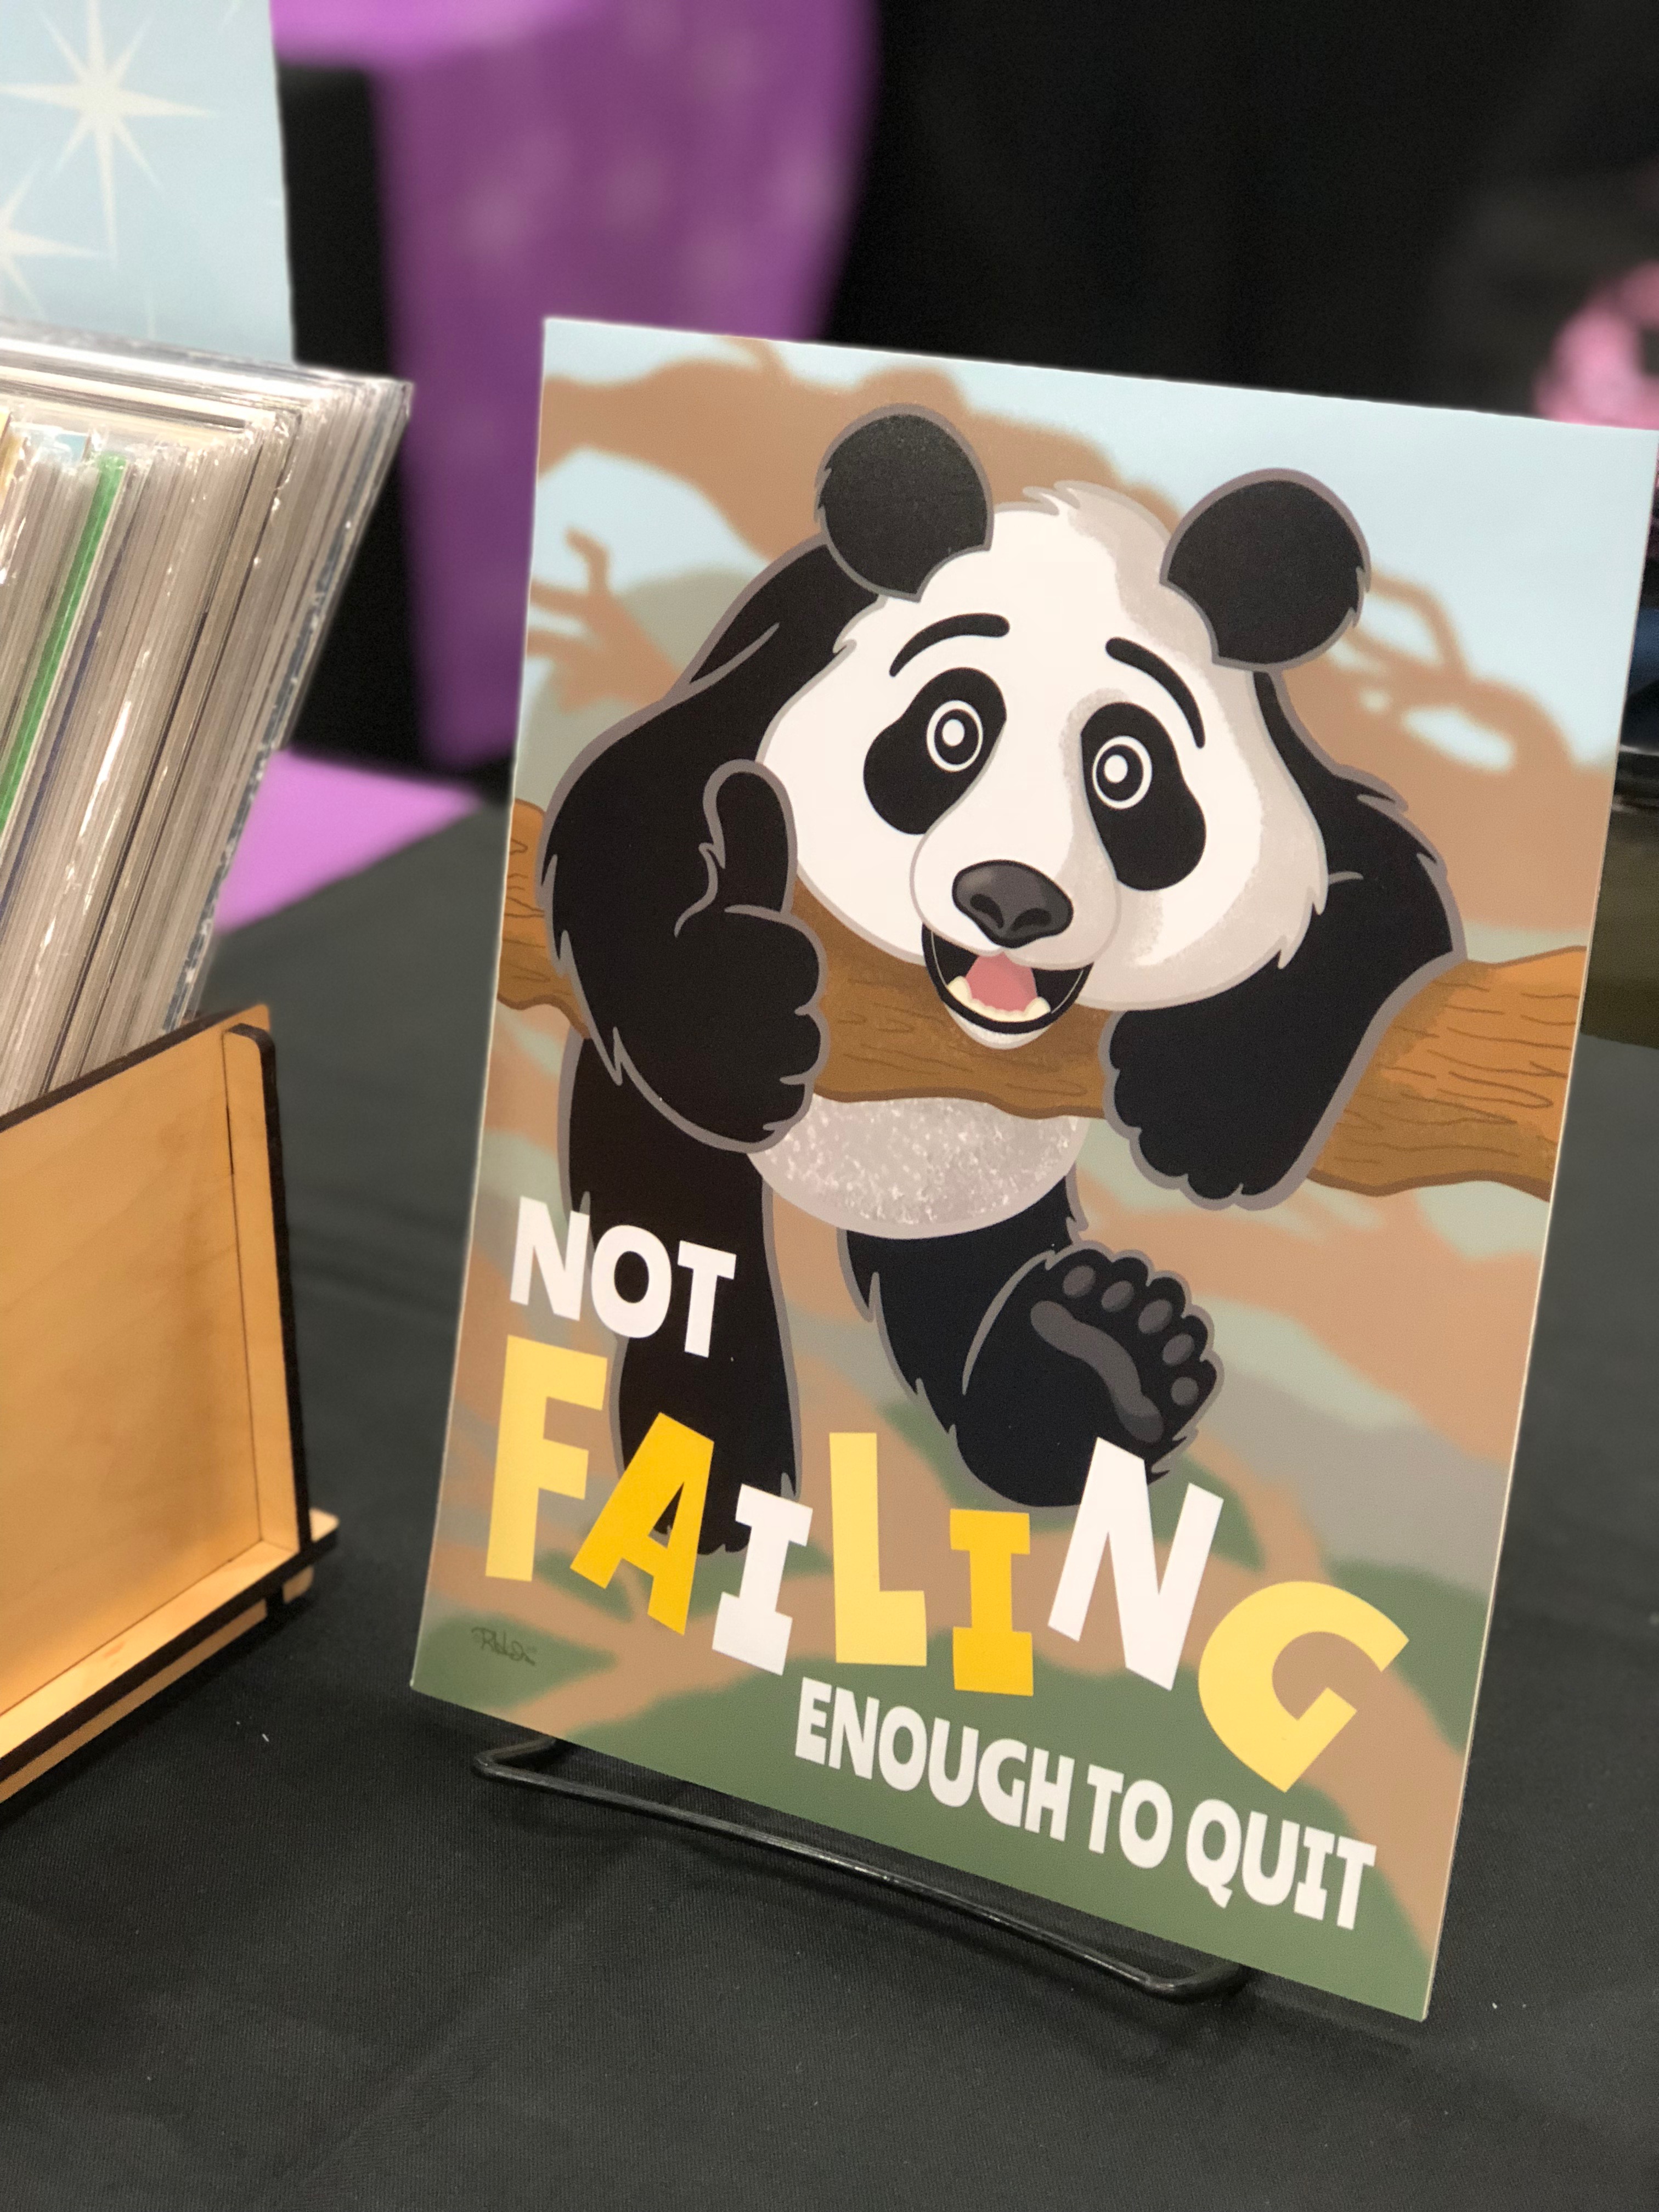 Photo of an art print depicting a panda barely hanging onto a branch, but giving a thumbs-up, captioned “Not Failing Enough to Quit!